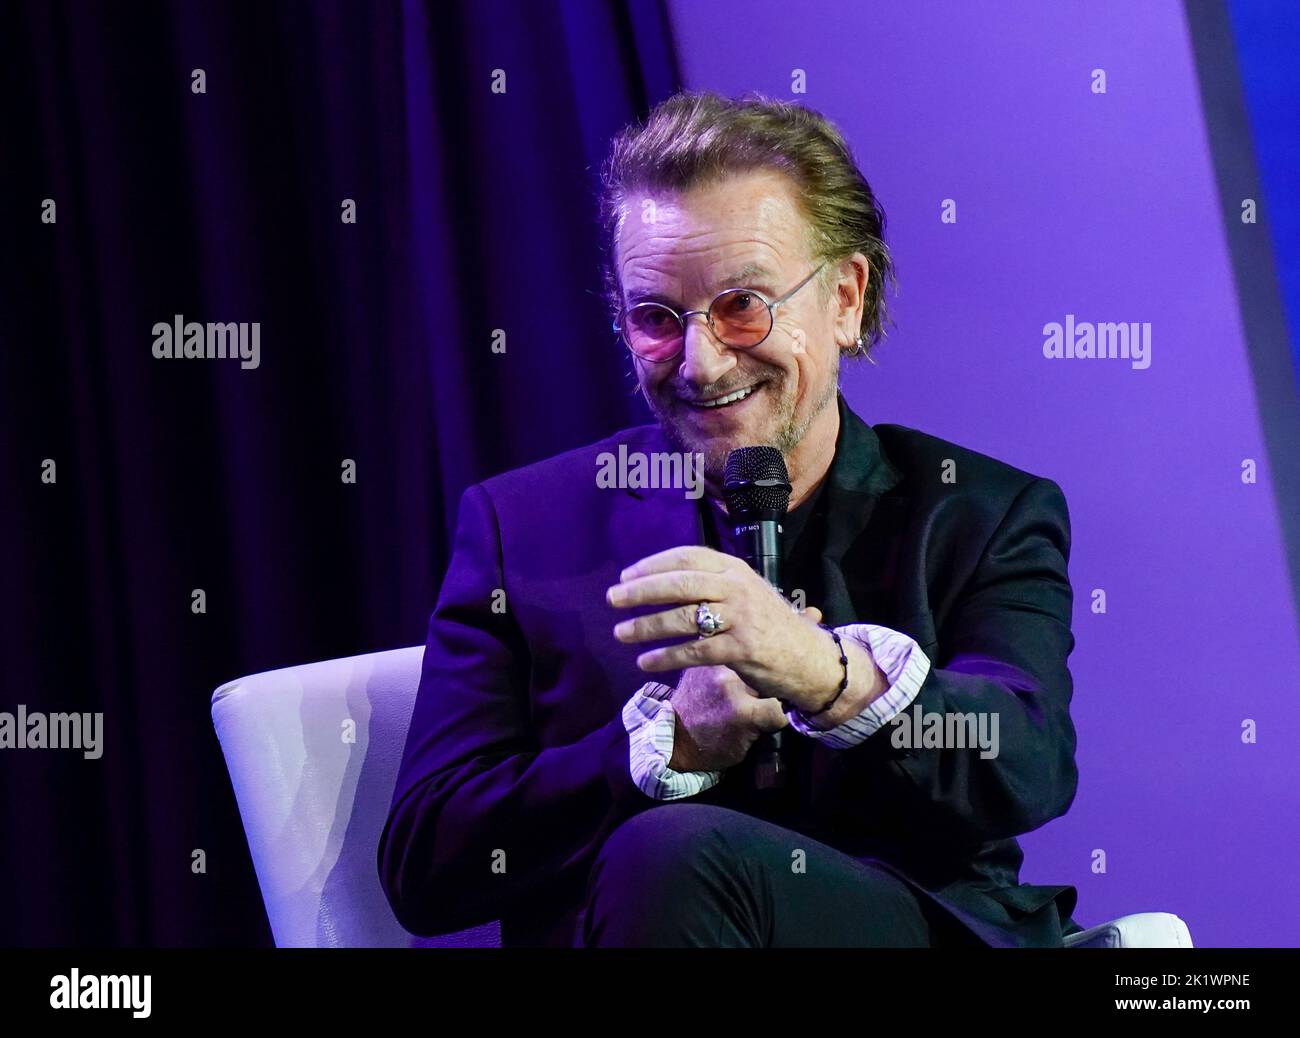 09/20/2022 New York City, New York Bono during the 2022 Clinton Global Initiative held at Hilton Midtown Tuesday September 20, 2022 in New York City. Photo by Jennifer Graylock-Alamy News 917-519-7666 Stock Photo